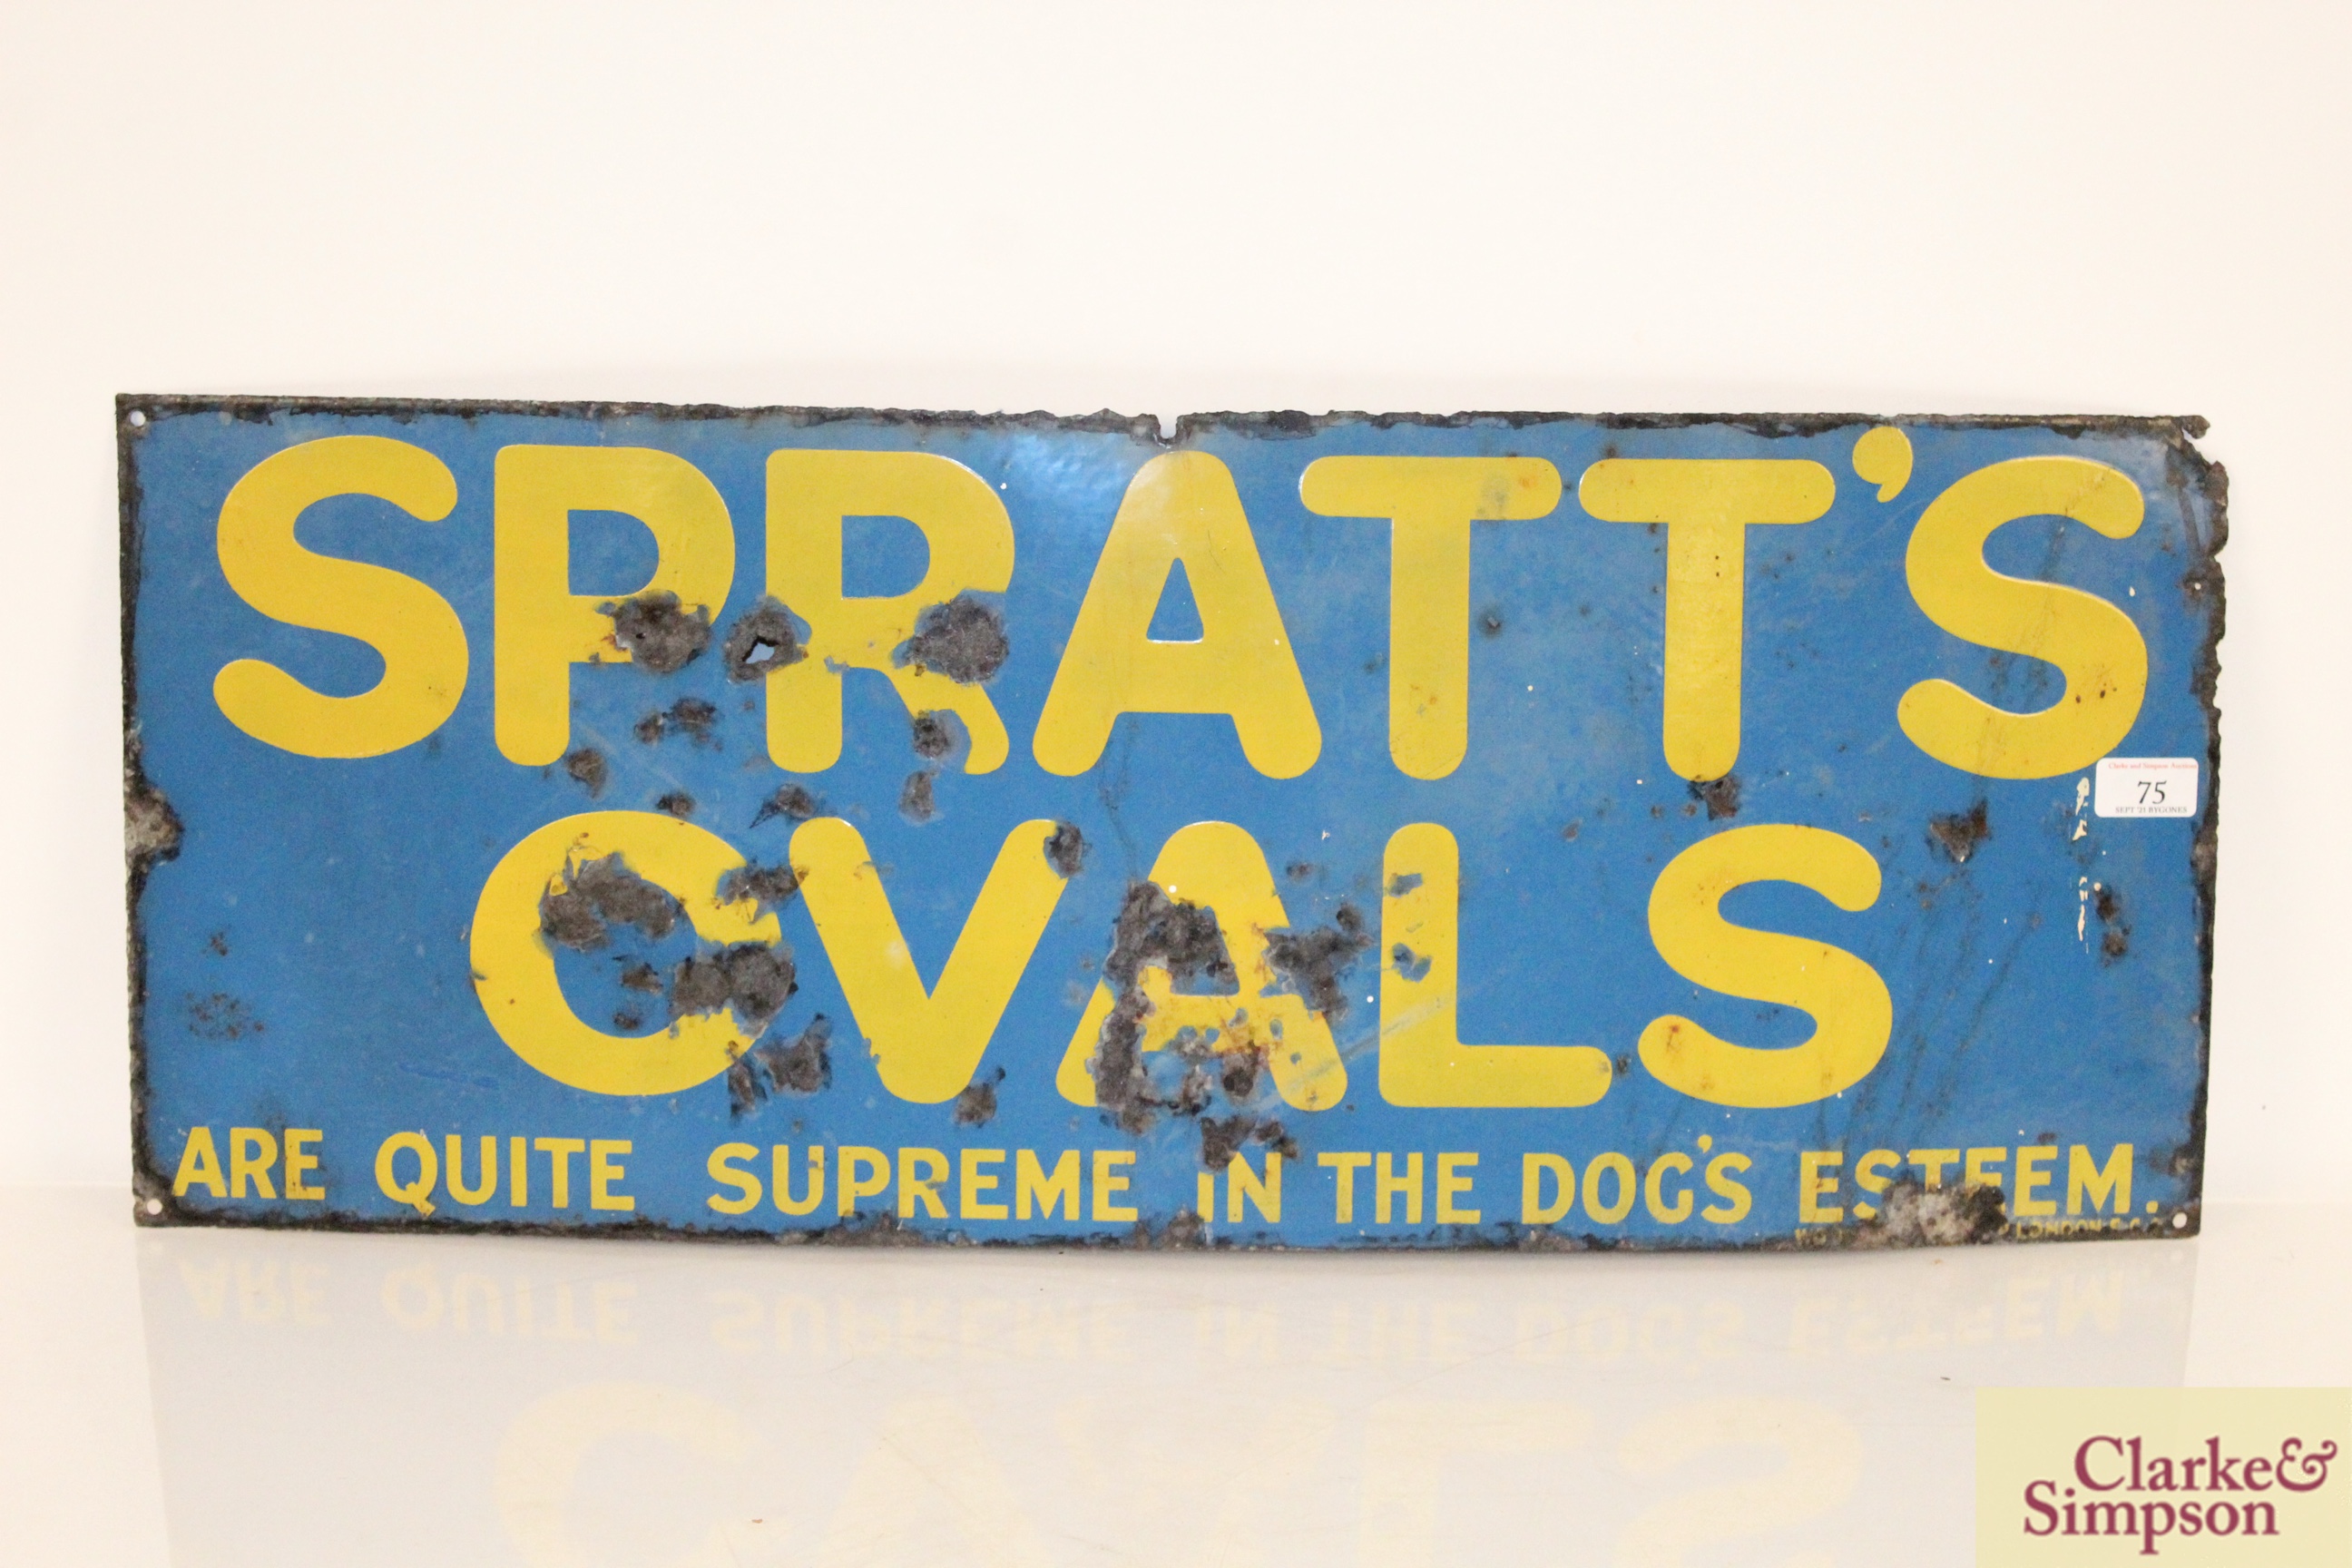 A "Spratt's Ovals Are Quite Supreme In The Dog's Est